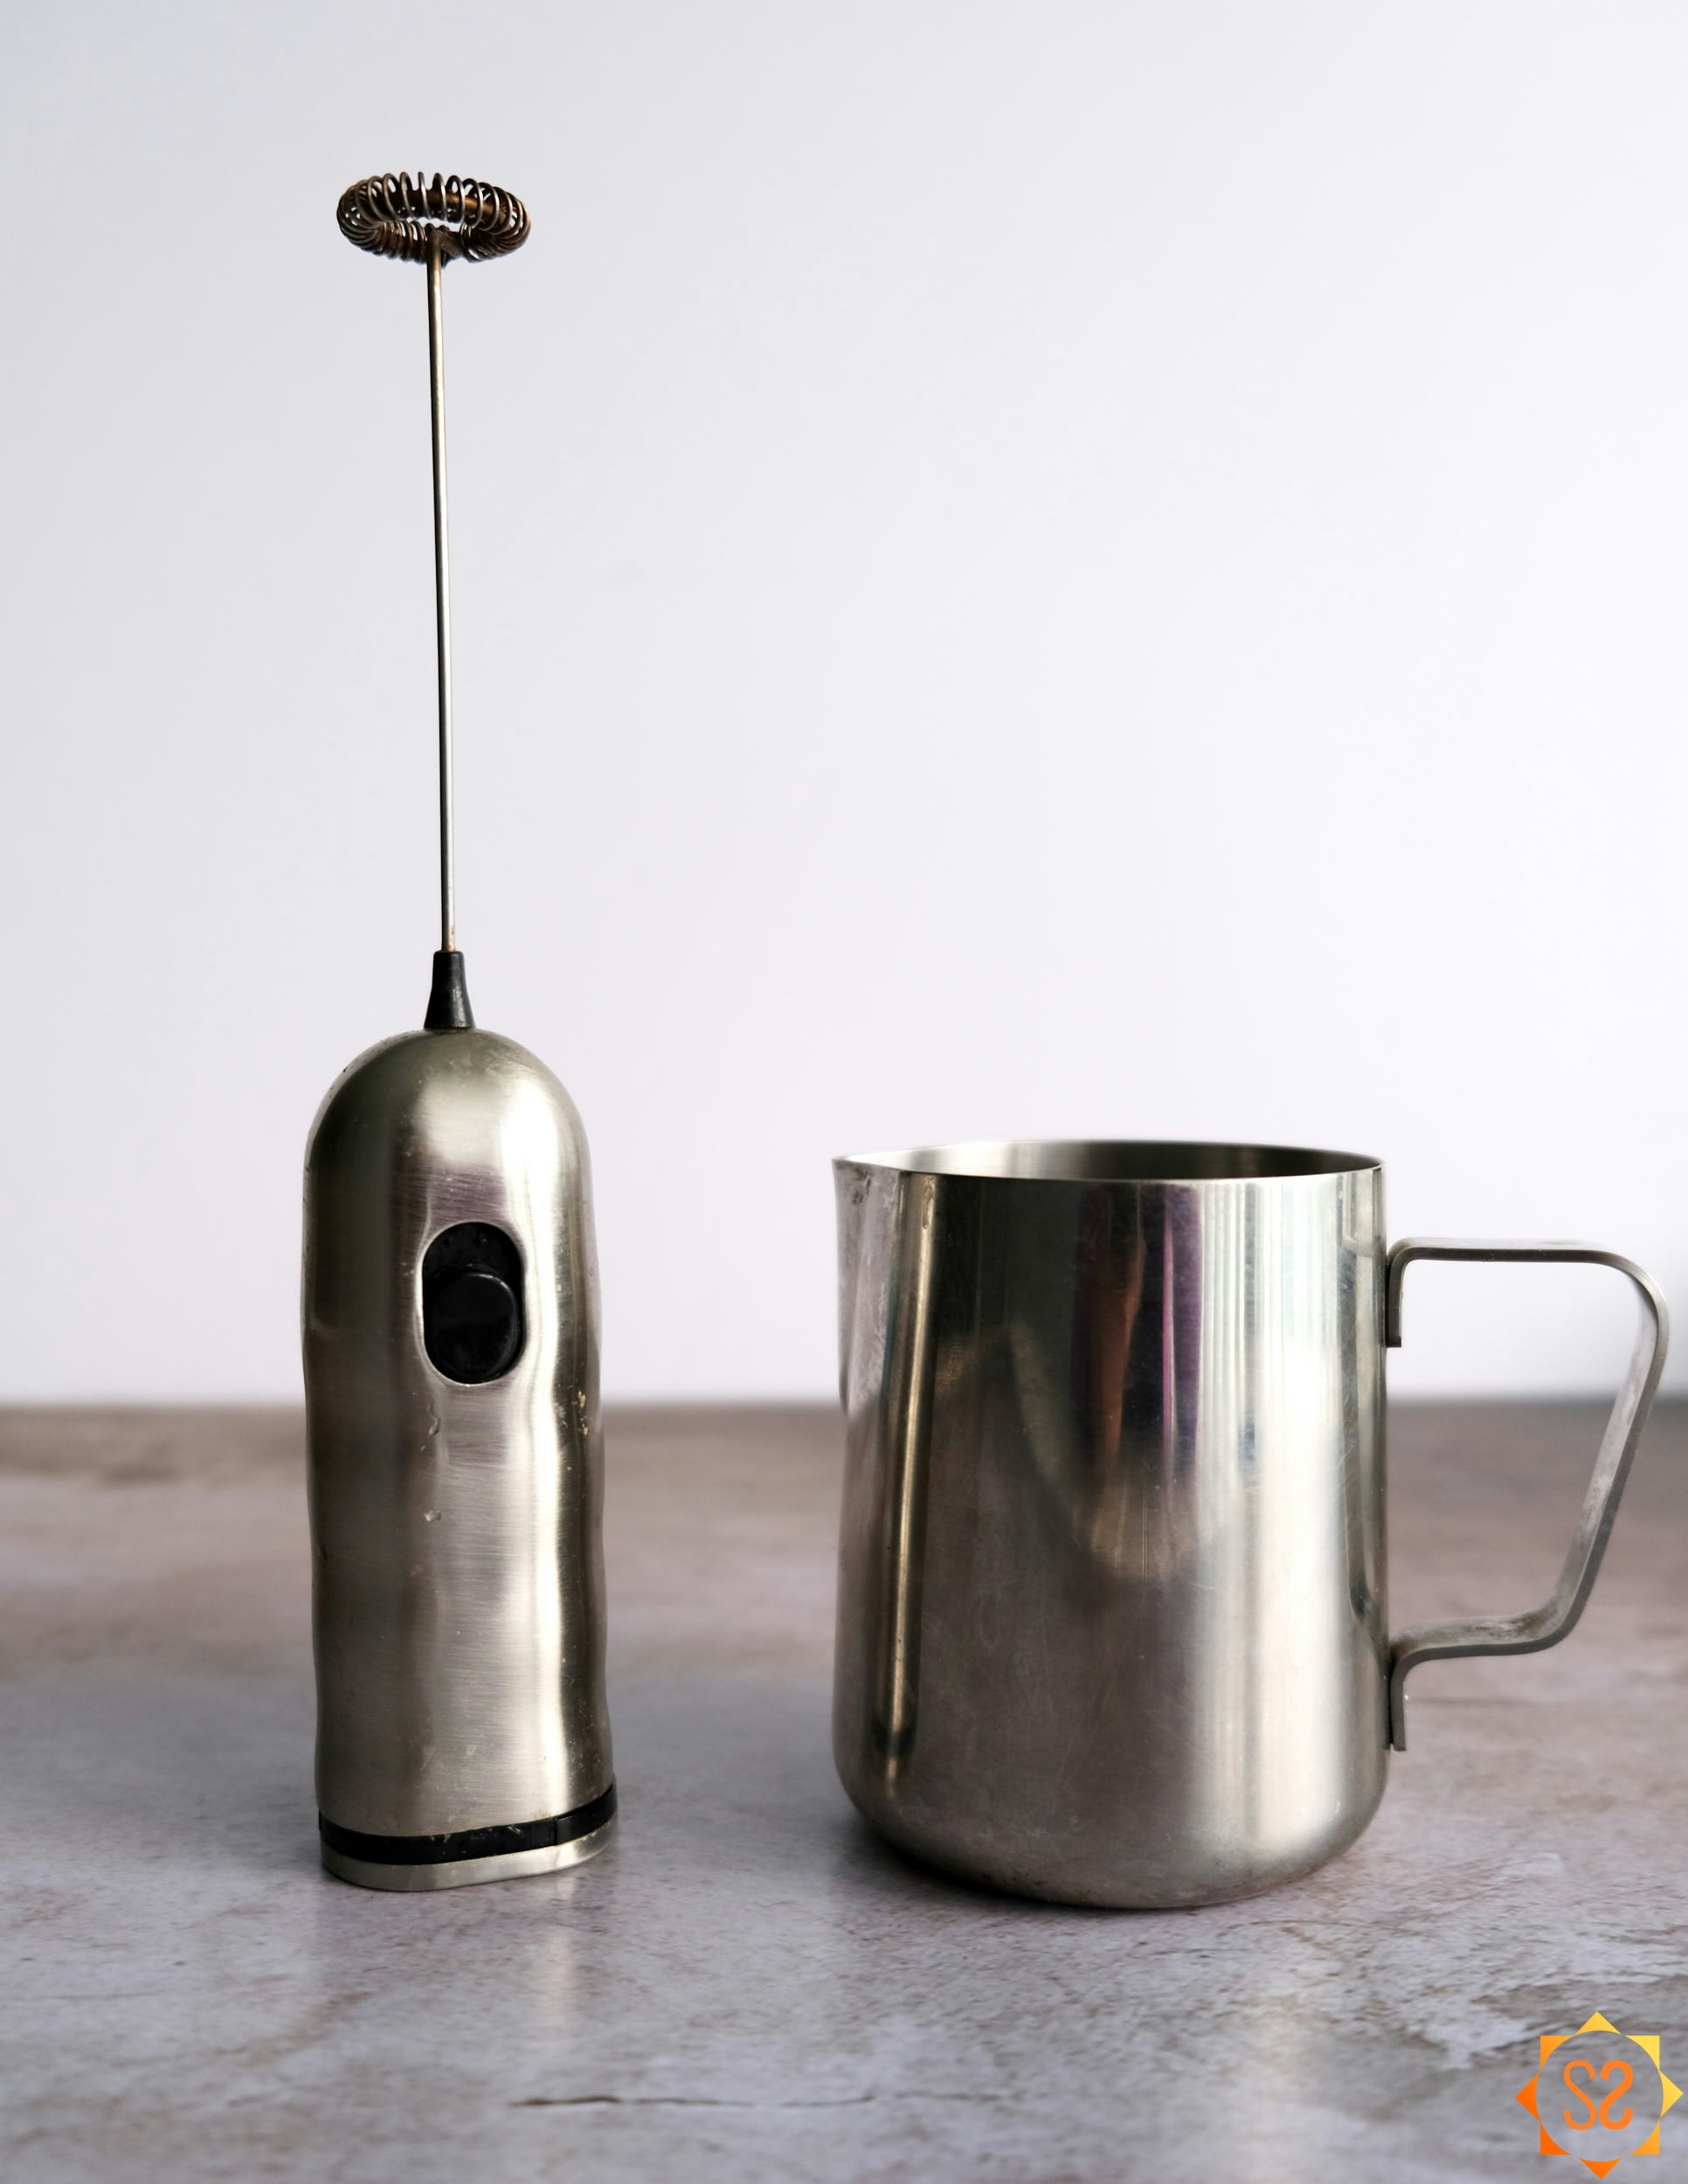 Milk frother and pitcher